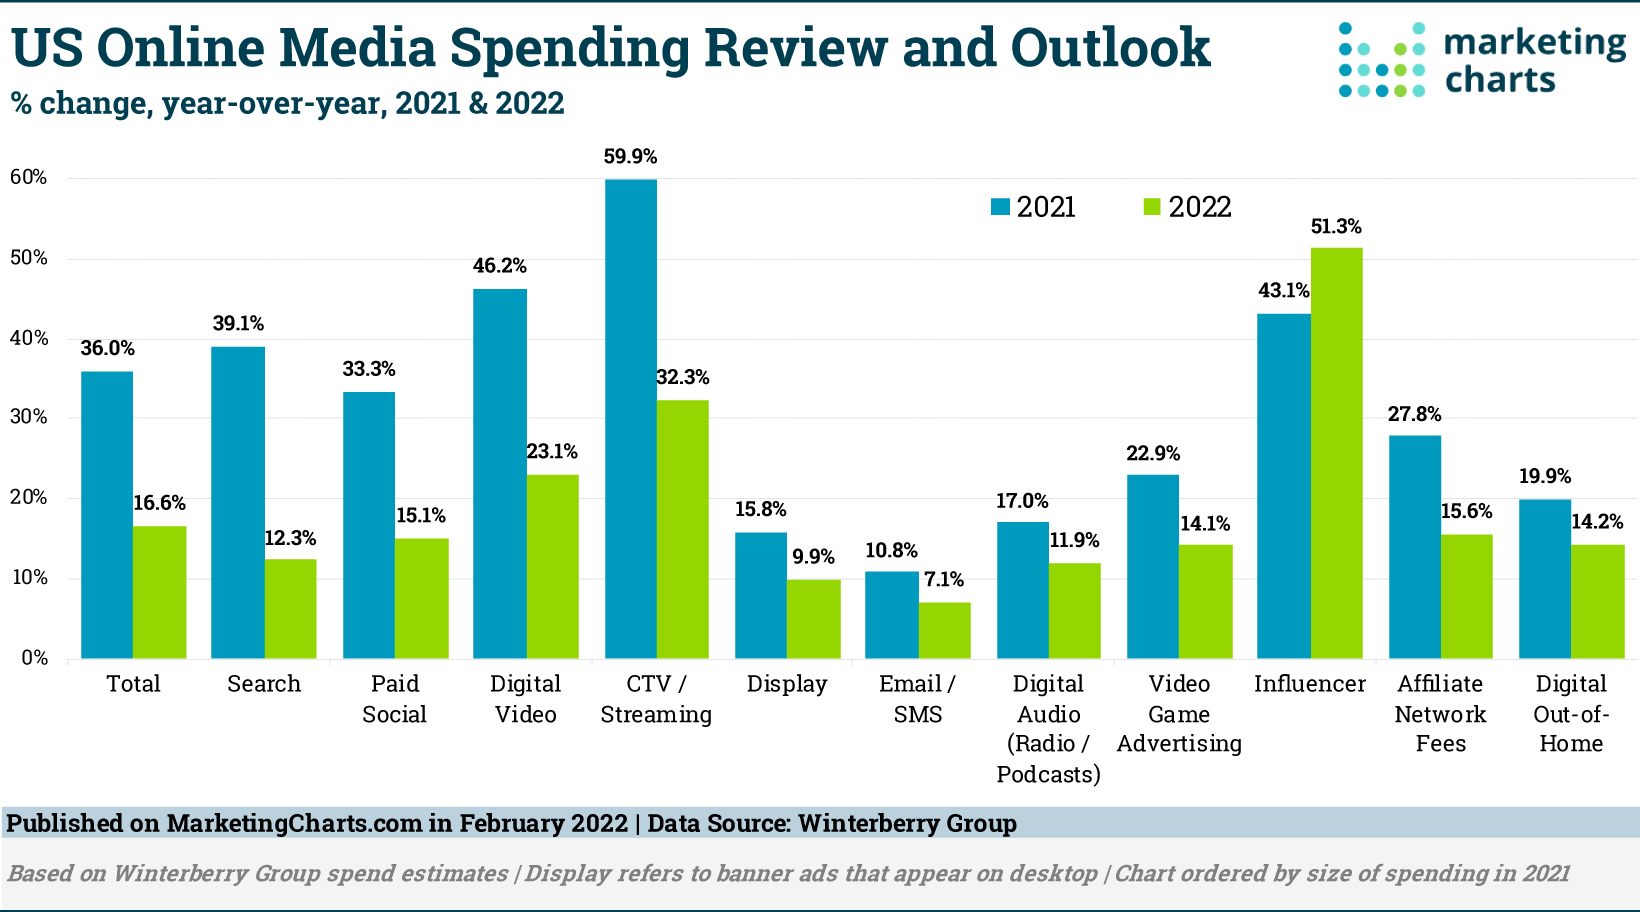 US Online Media Spend in 2021 and the Outlook for 2022